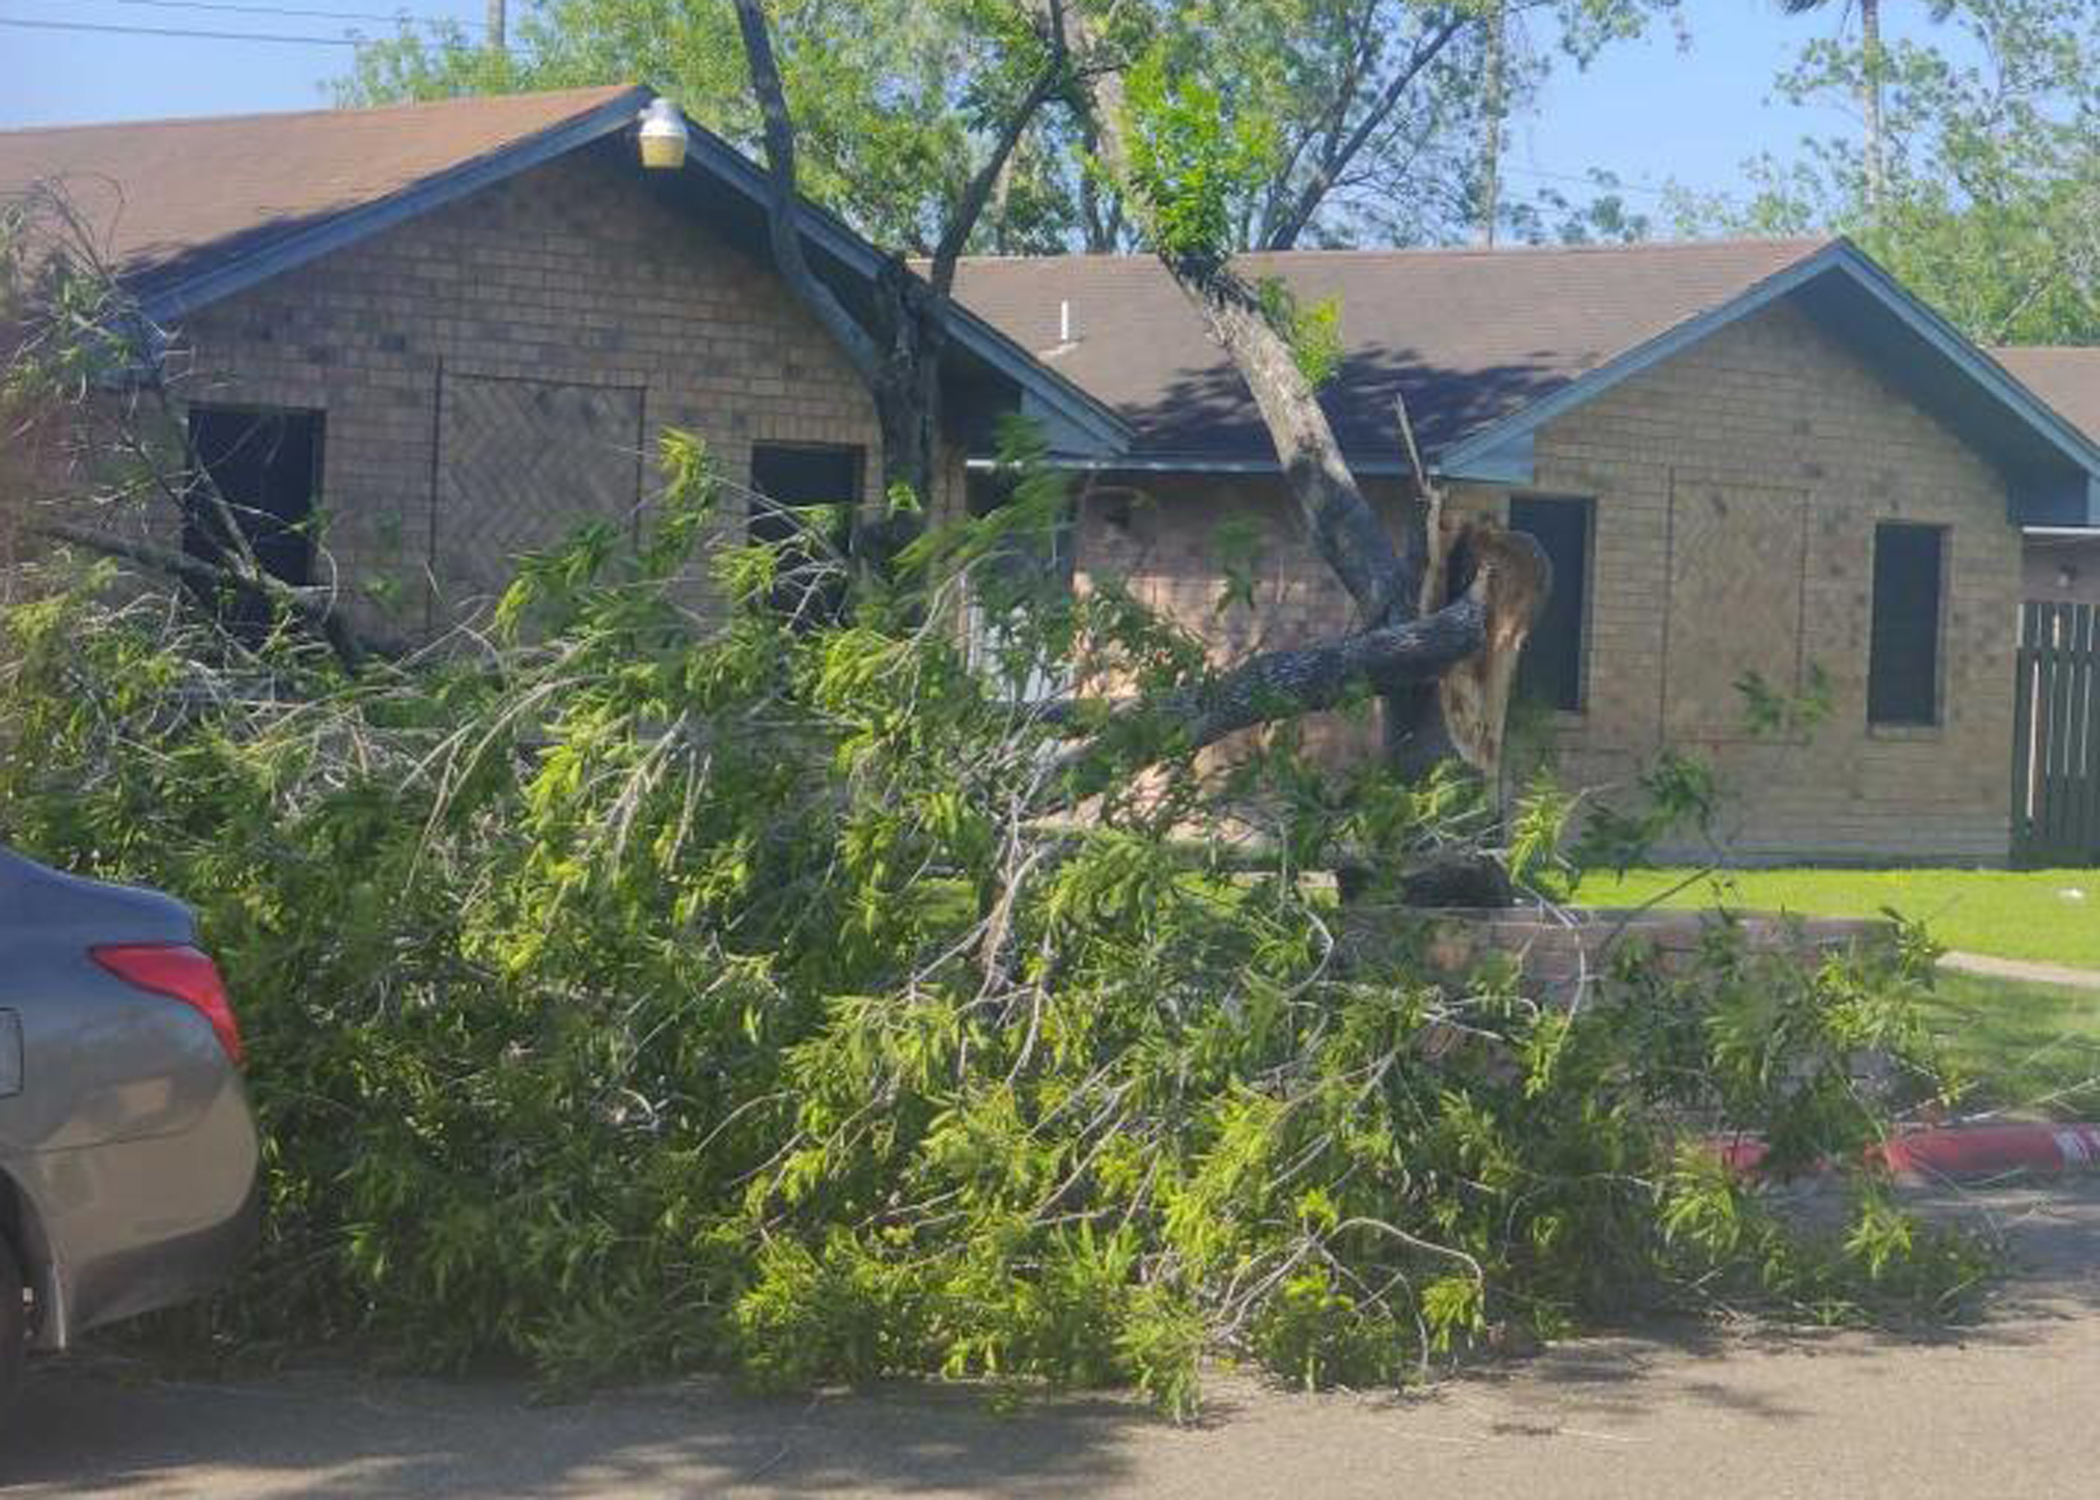 Edinburg waives fence, roofing permit fees for storm damage